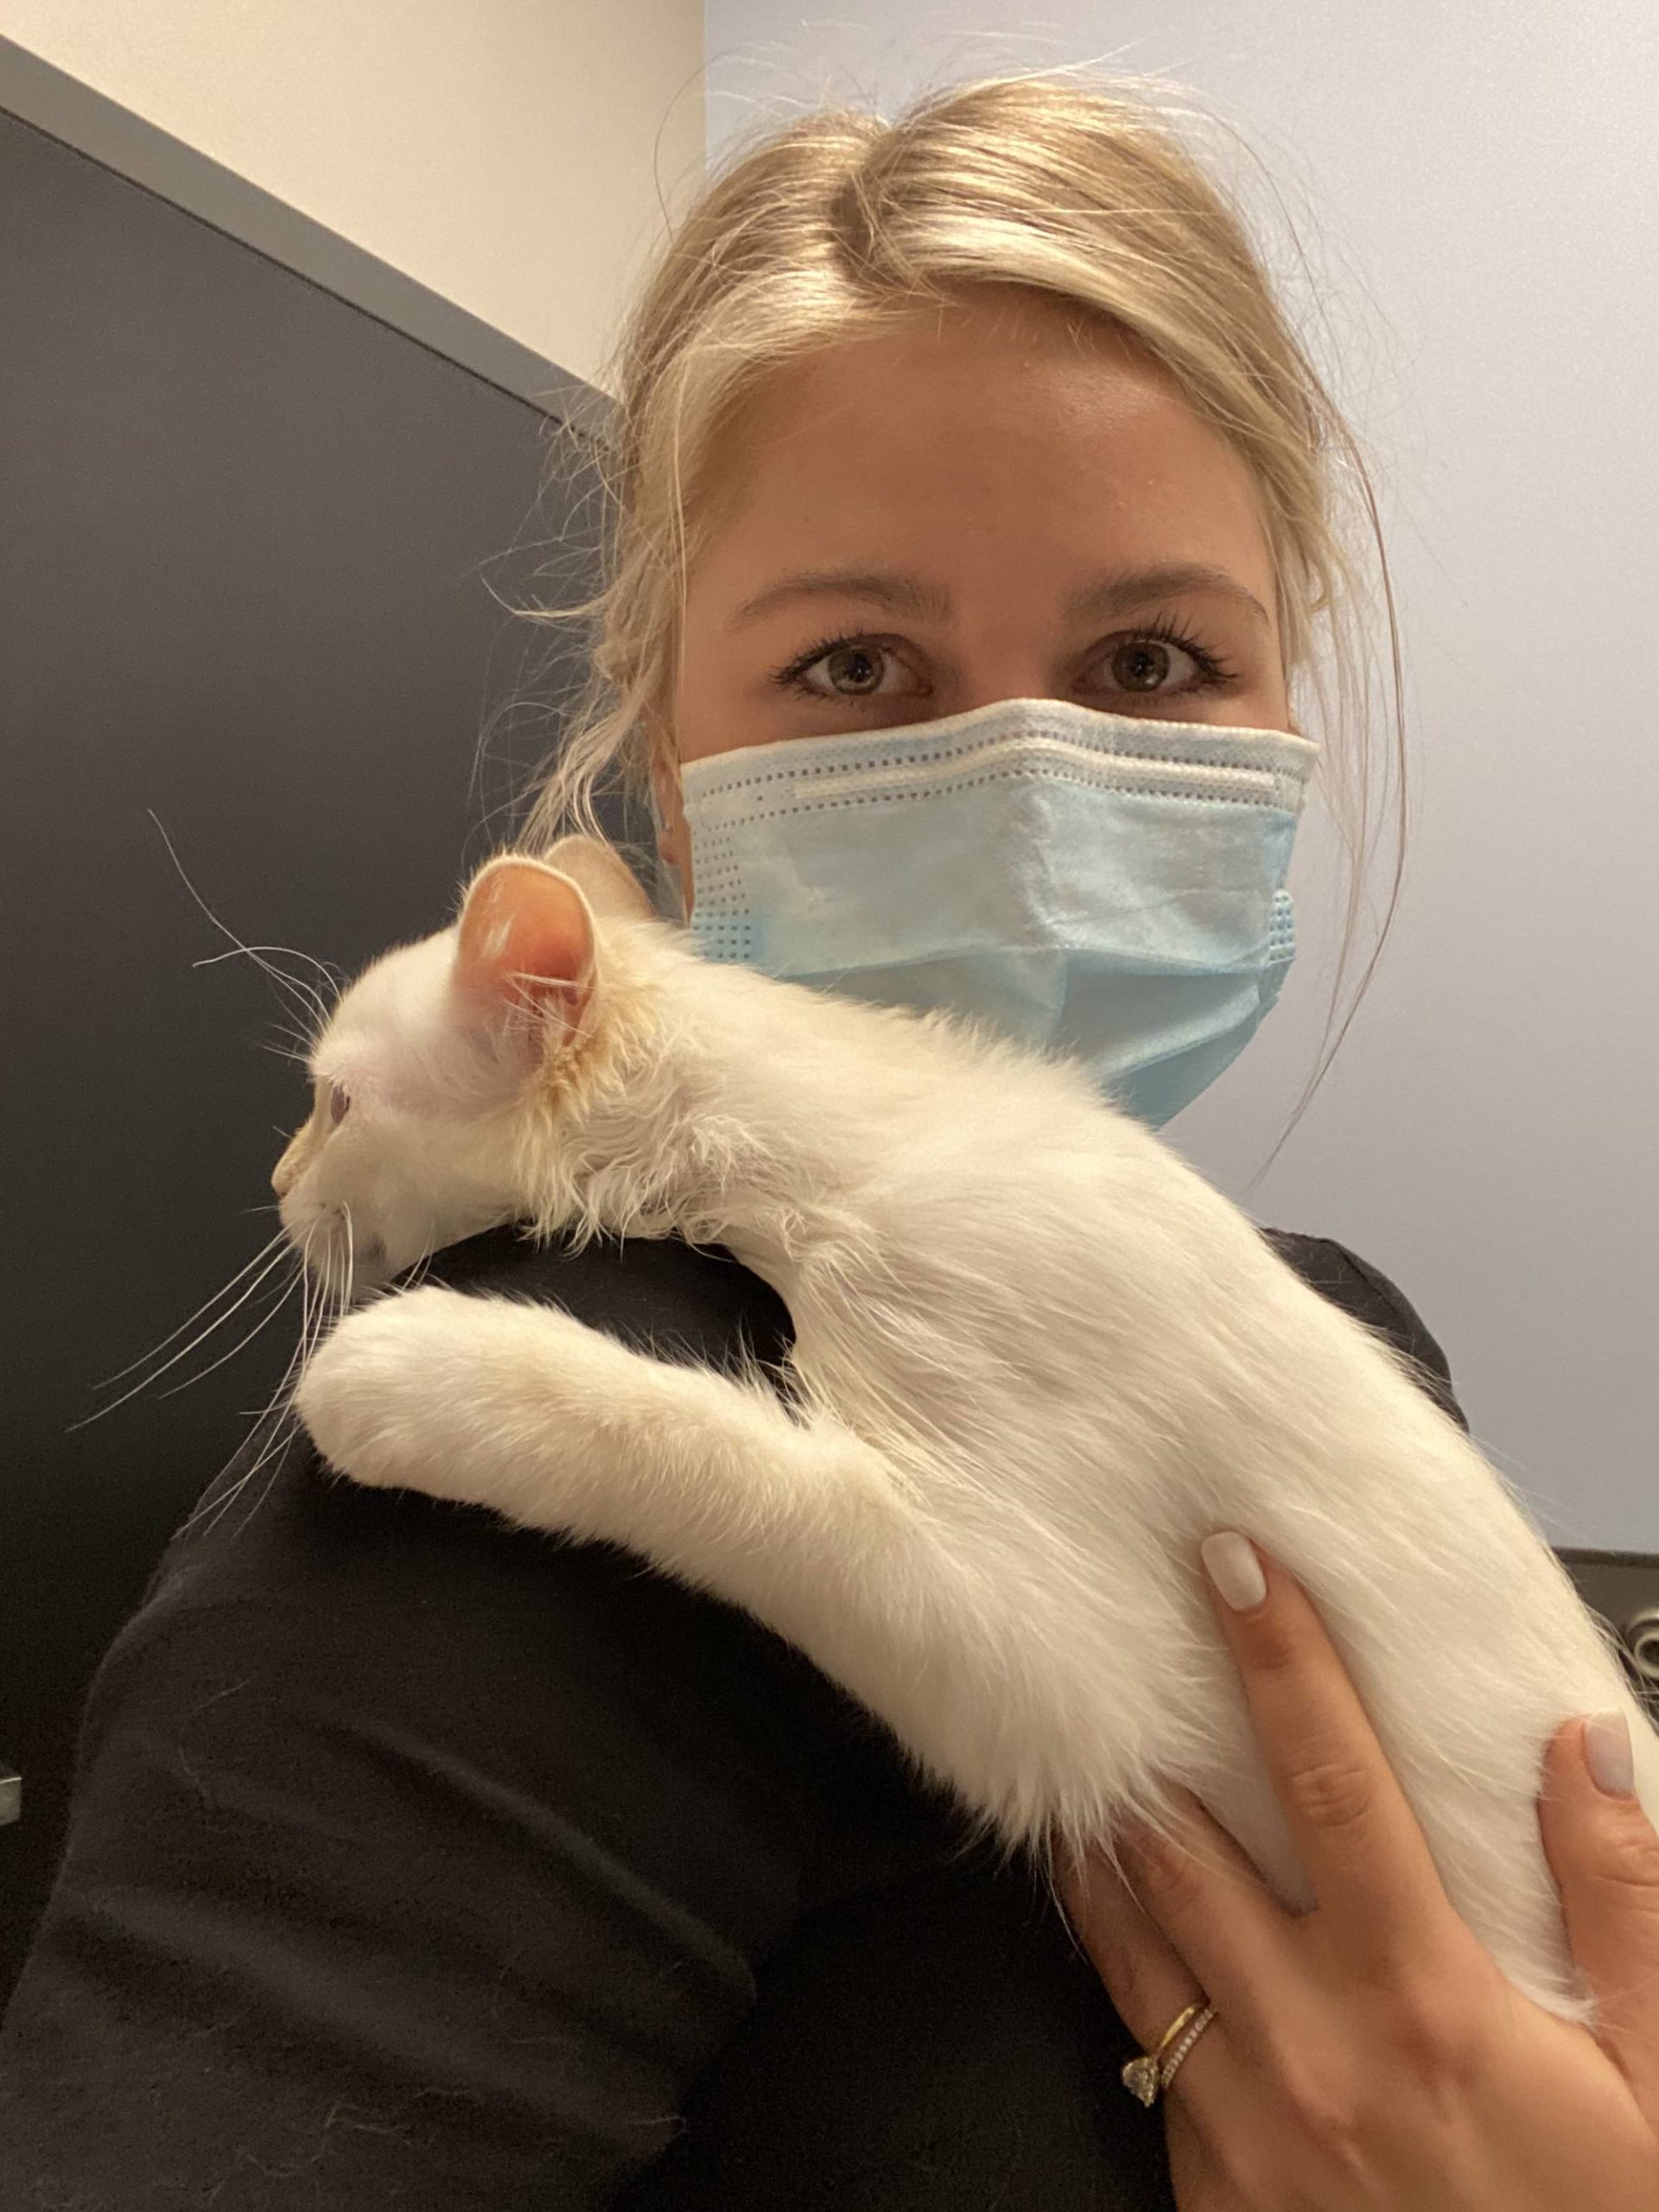 My wife just sent me a picture of our cat at the vet. Safe to say she’s a little scared